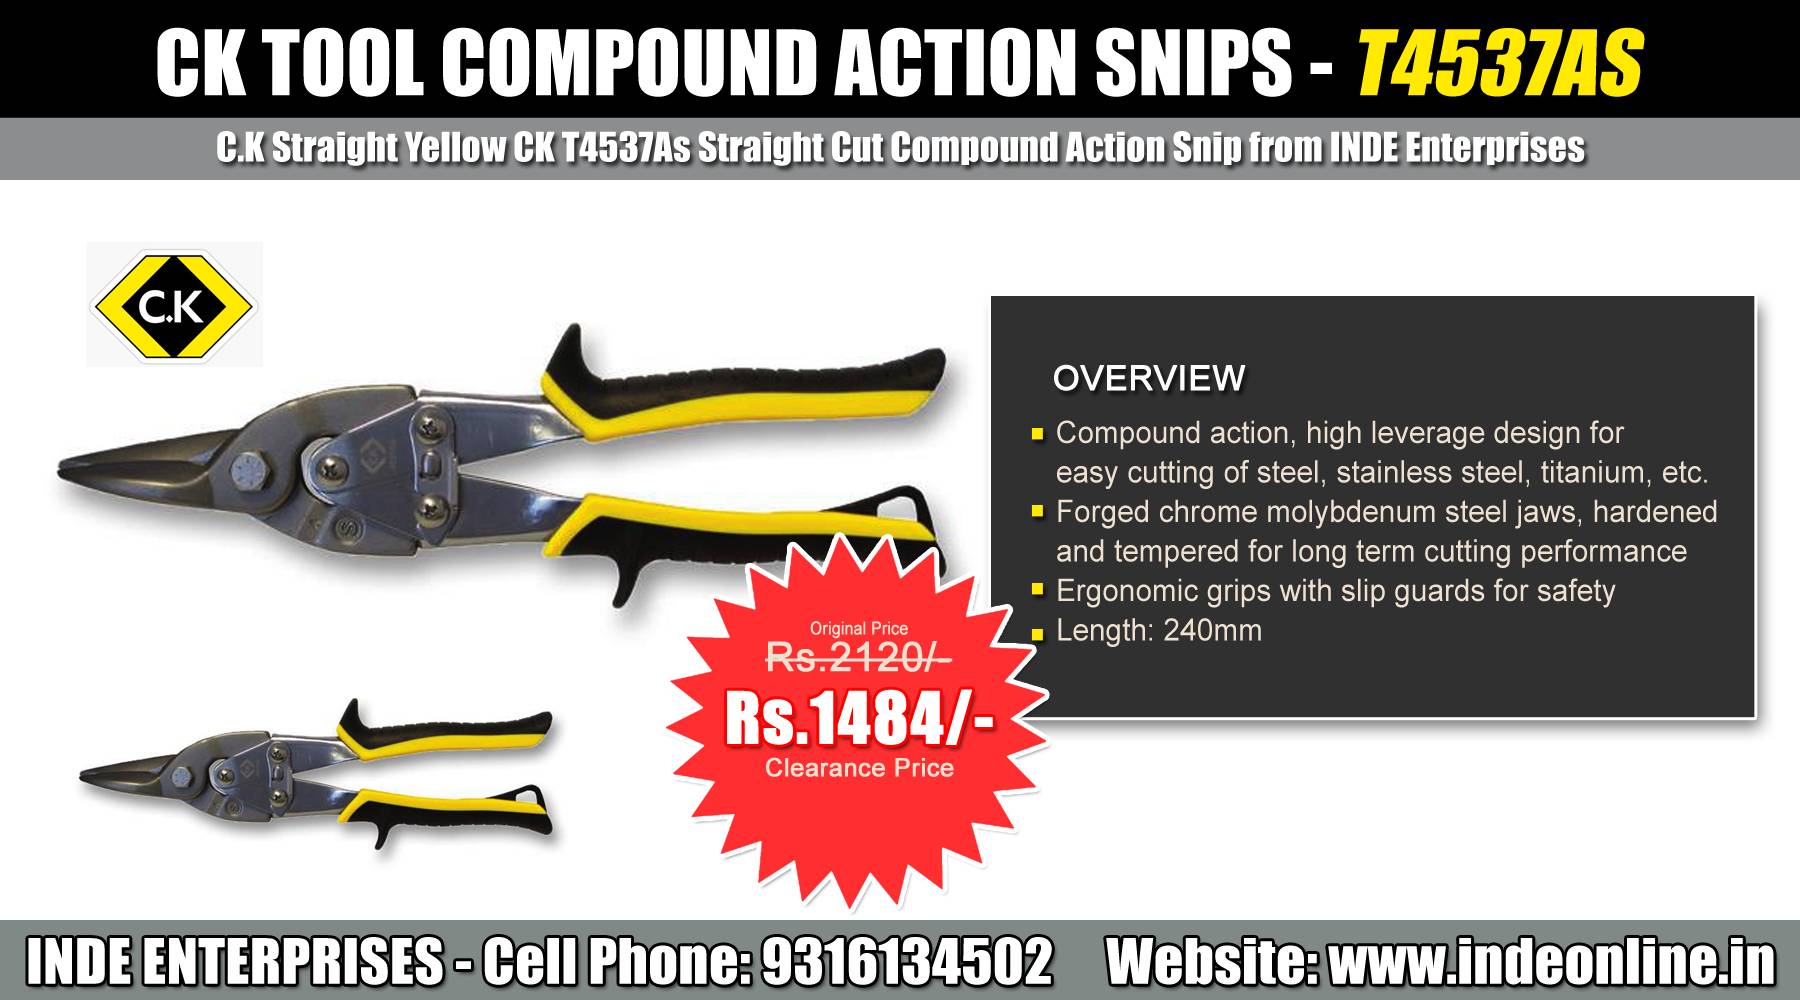 CK Tool Compound Action Snips - T4537AS Price Rs.1484/-